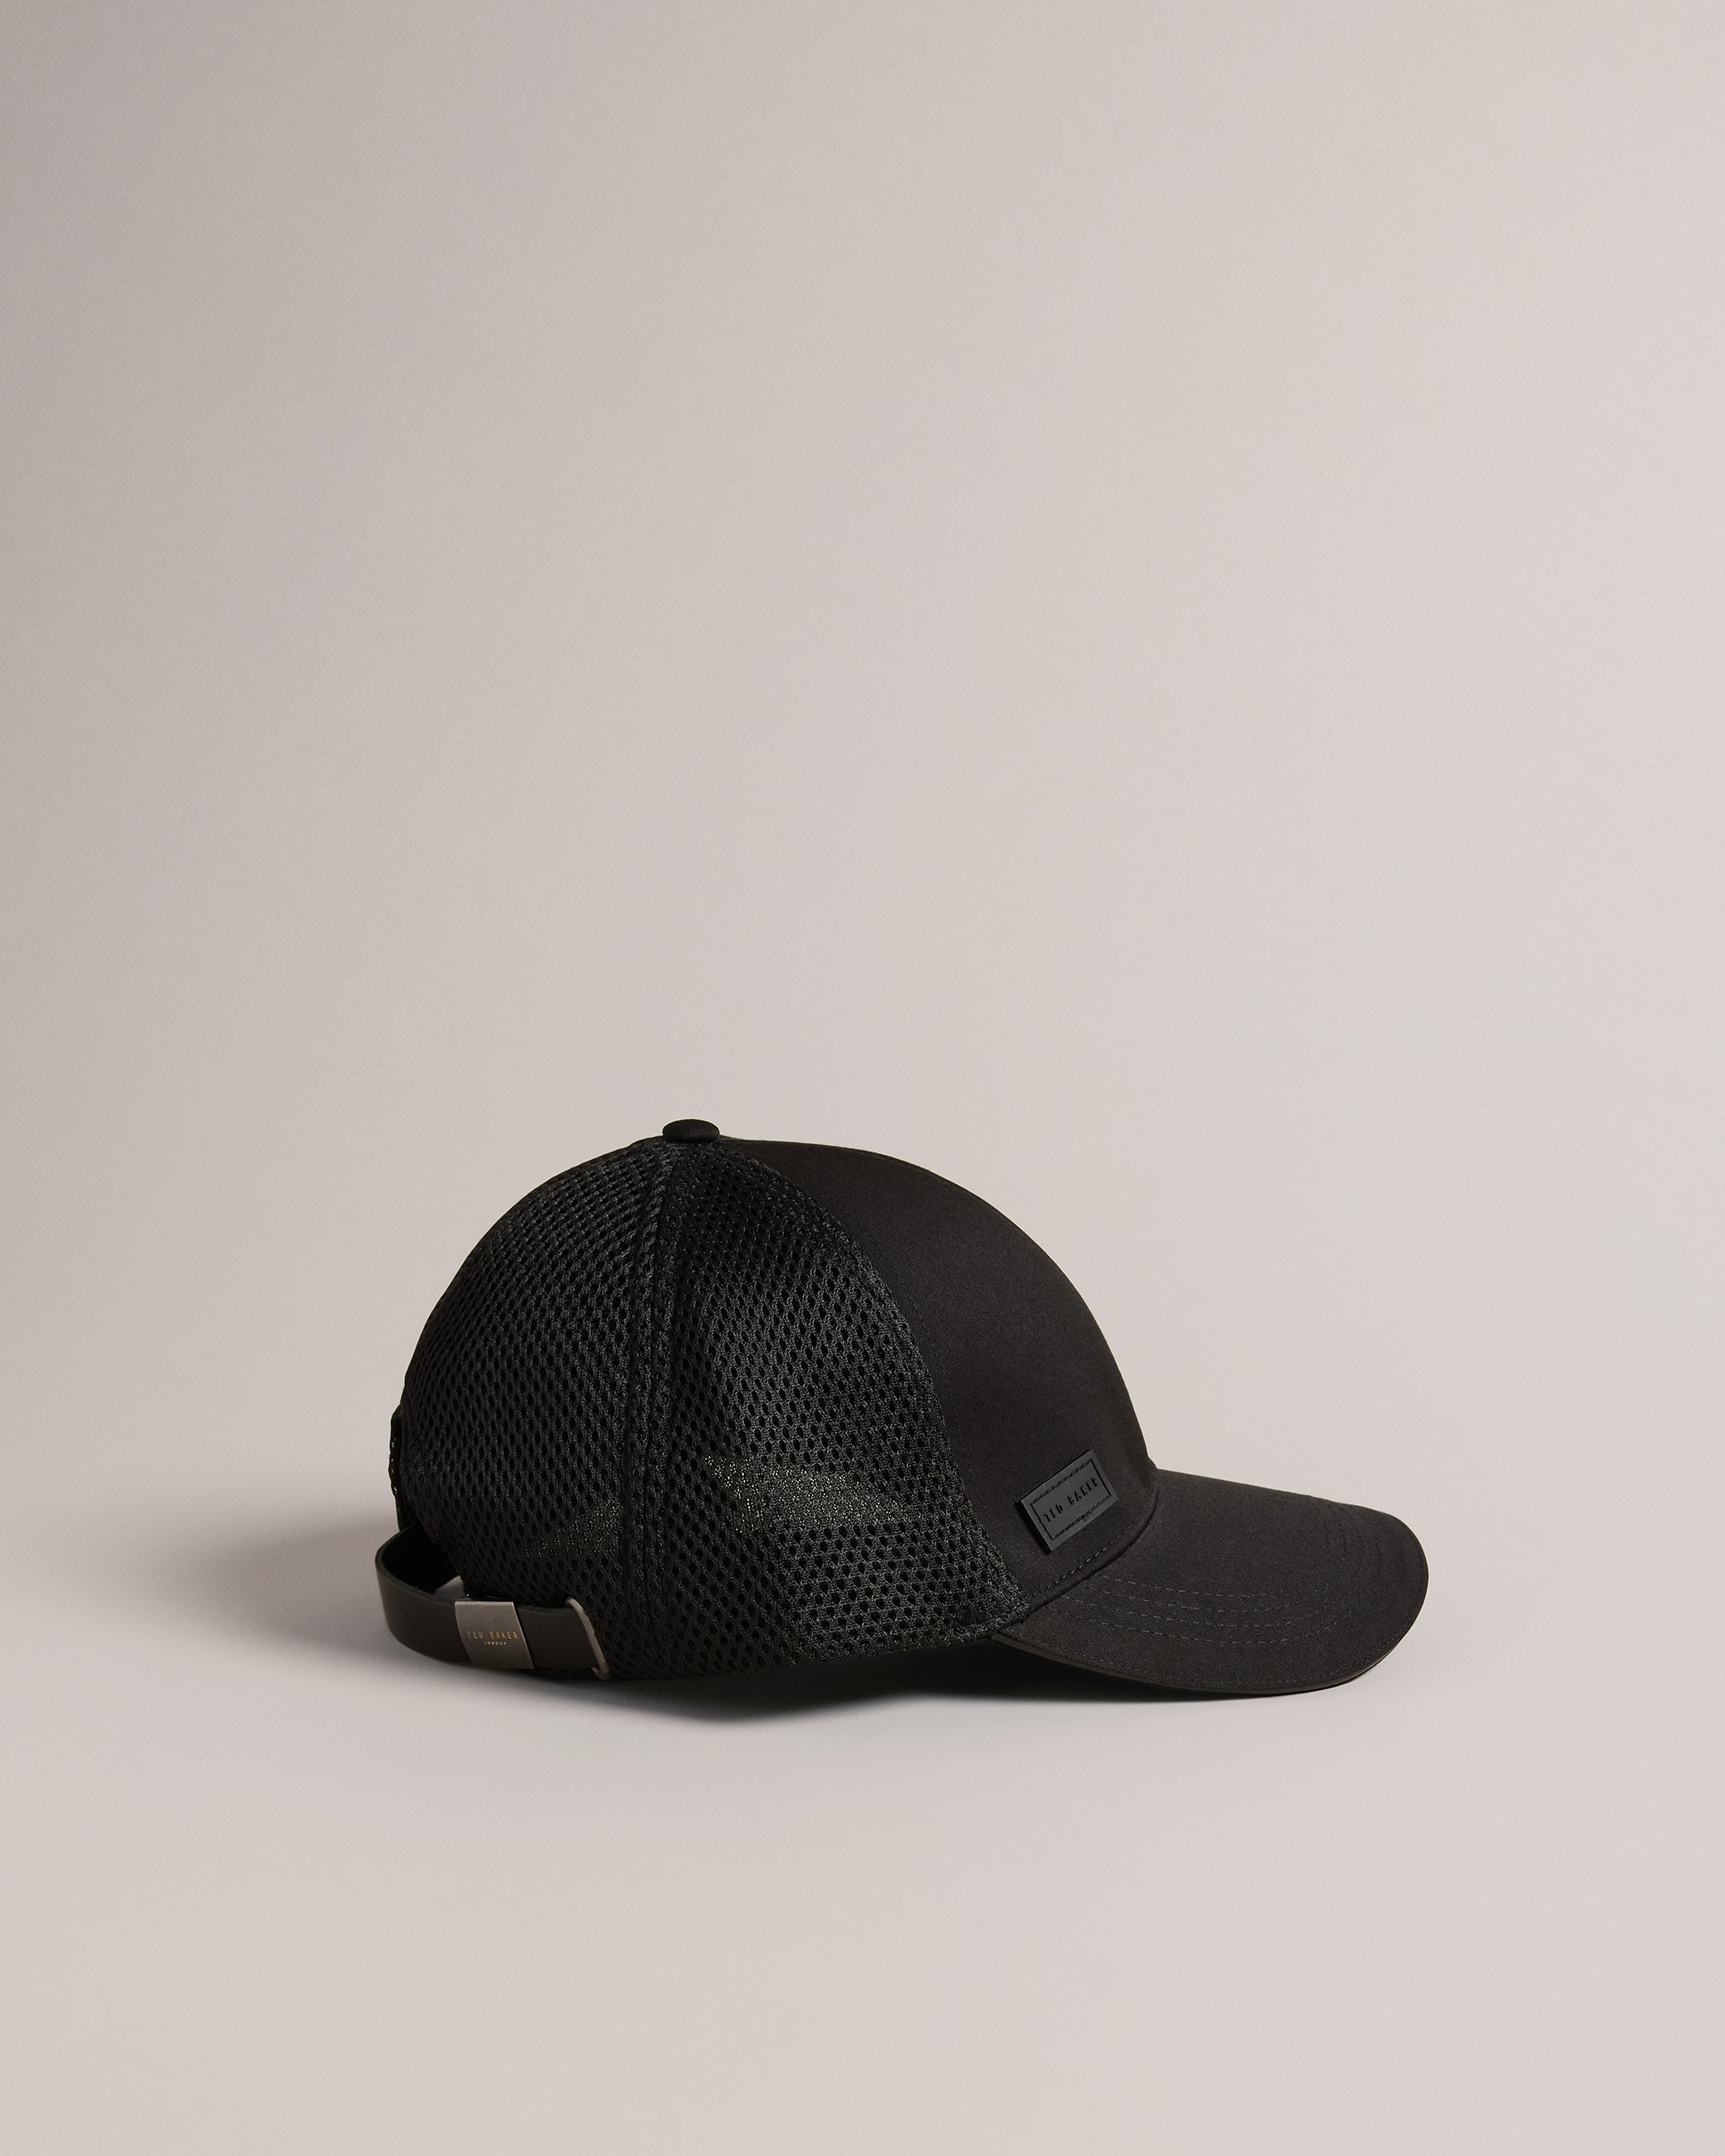 Men's Hats & Caps – Ted Baker, United States